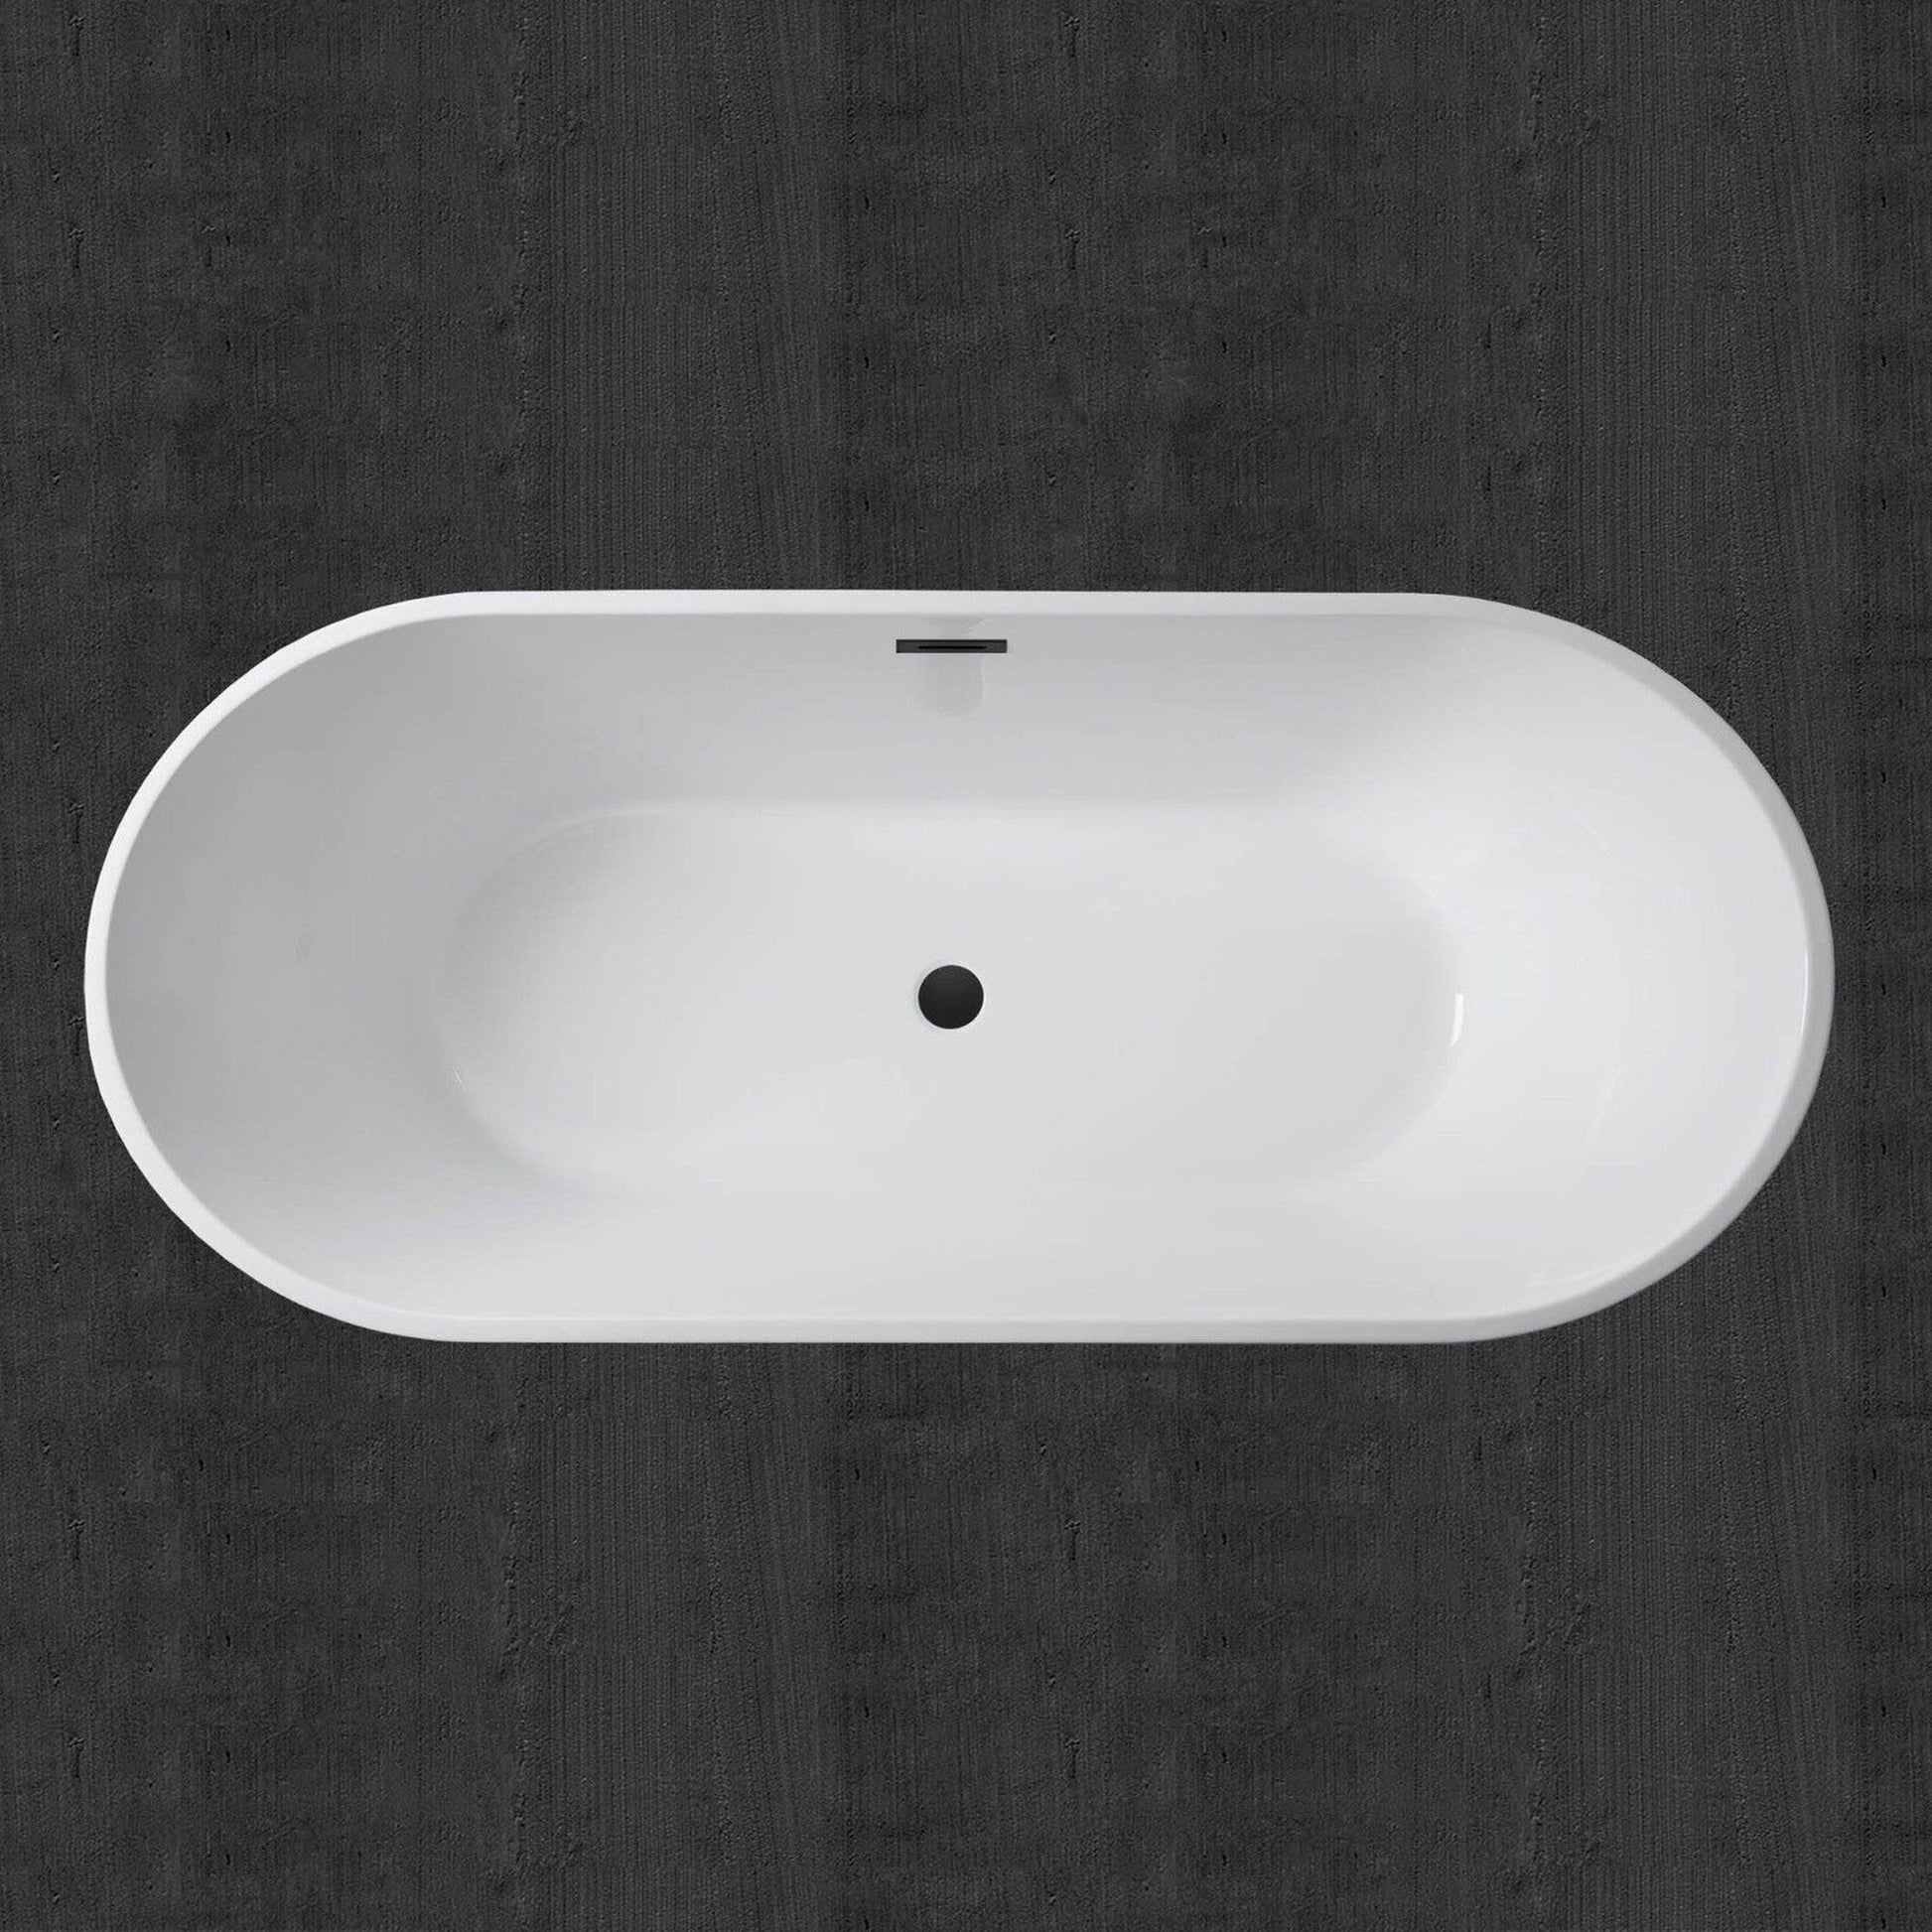 WoodBridge 71" White Acrylic Freestanding Contemporary Soaking Bathtub With Matte Black Drain, Overflow, F0072MBDR Tub Filler and Caddy Tray